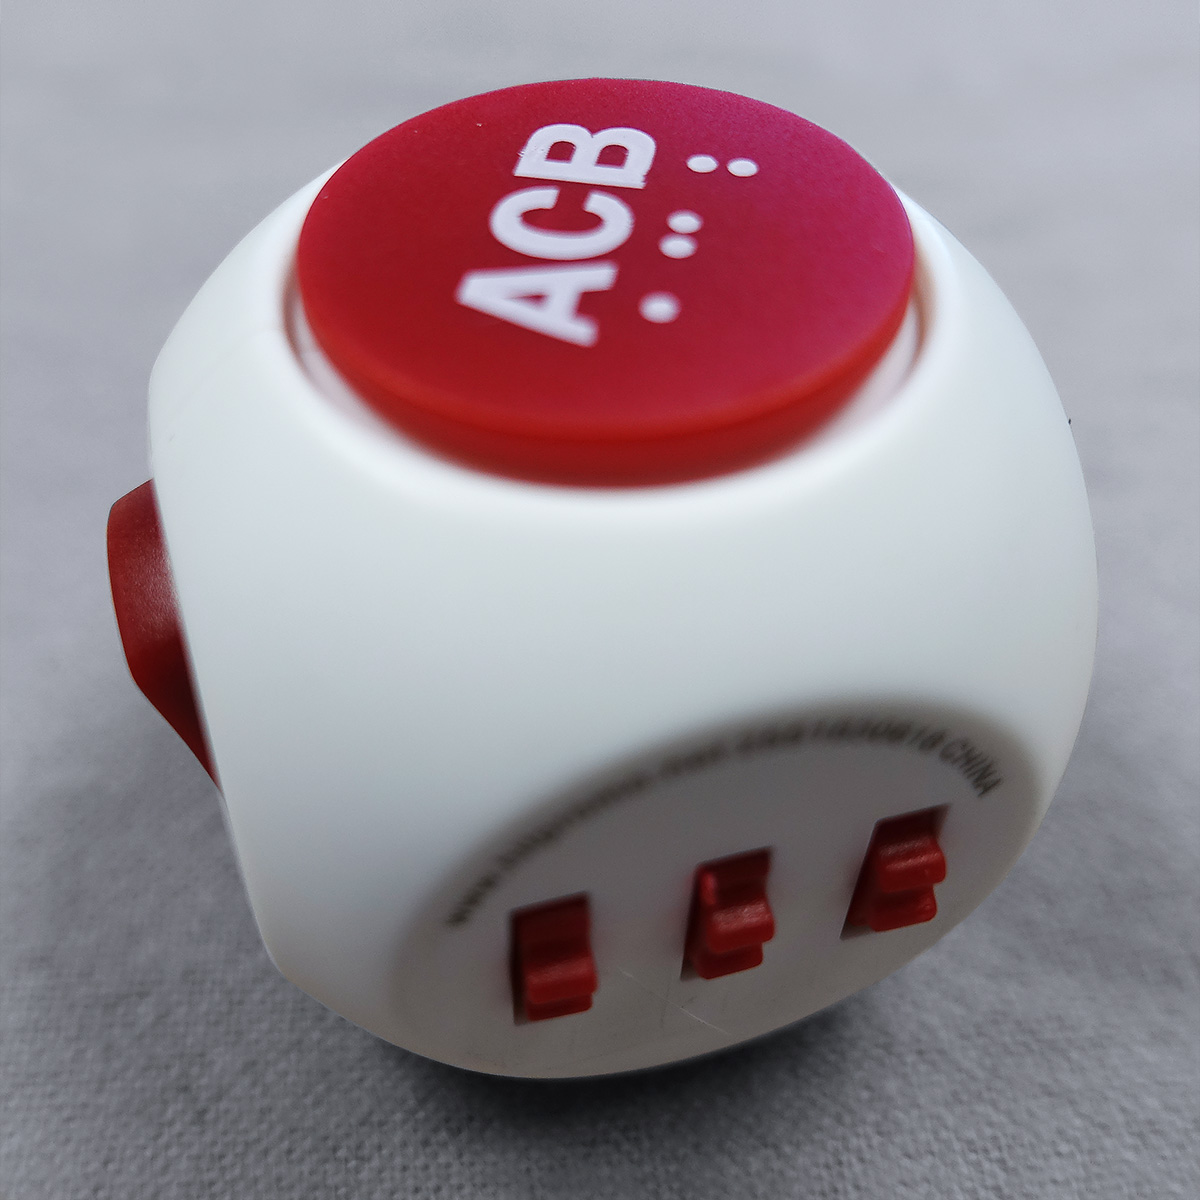 Red and white spinning fidget cube